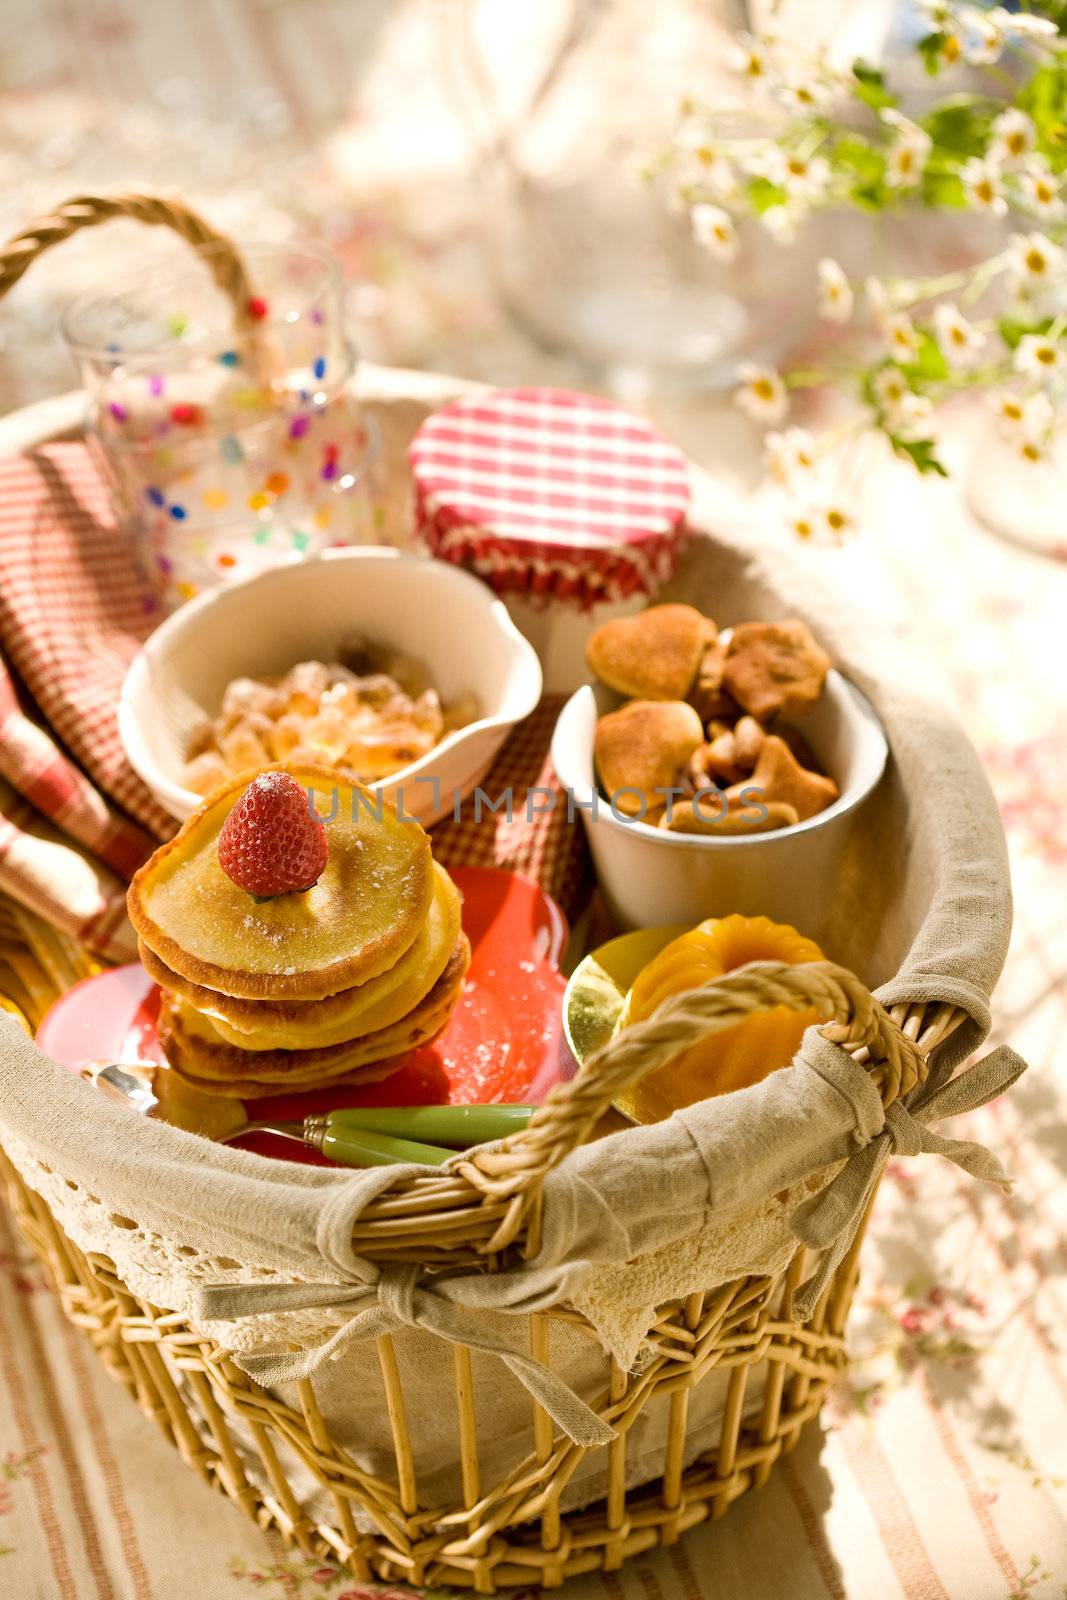 Pancakes and sweets in basket by Gravicapa